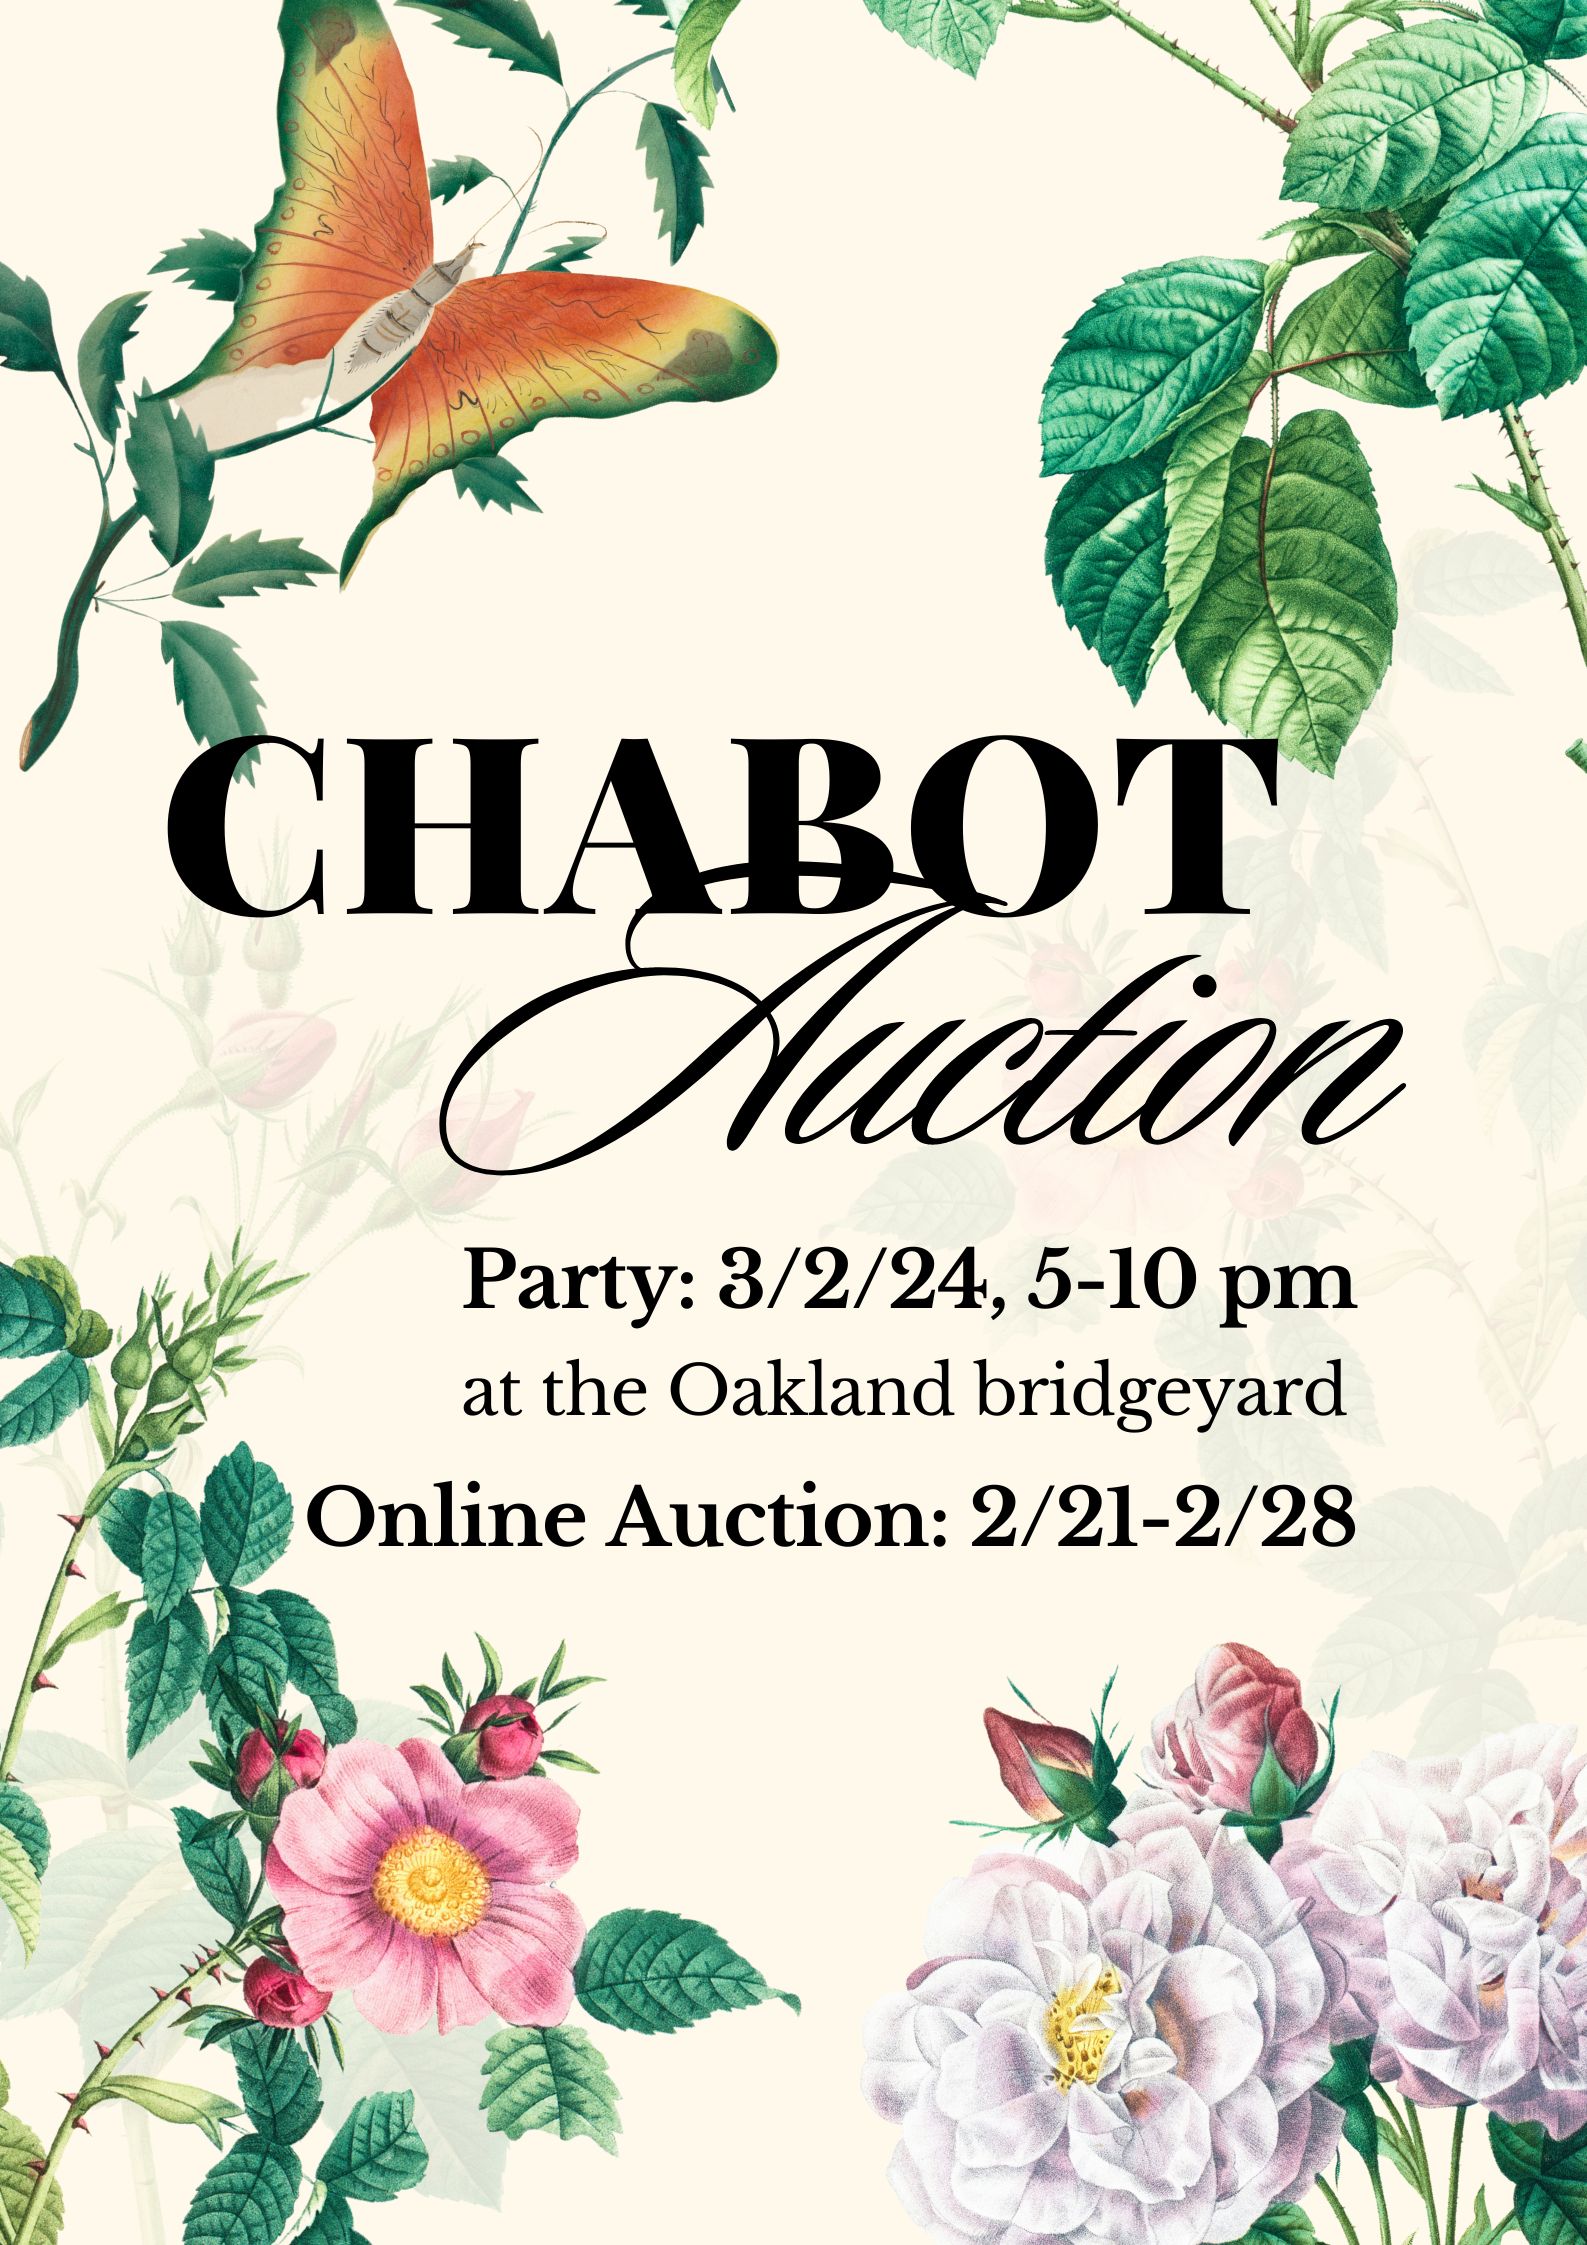 Decorative butterflies and floral illustrations on a tan background with words Chabot Auction Party 3/2/24 5-10pm at the Oakland Bridgeyard, Online auction 2/21-2/28